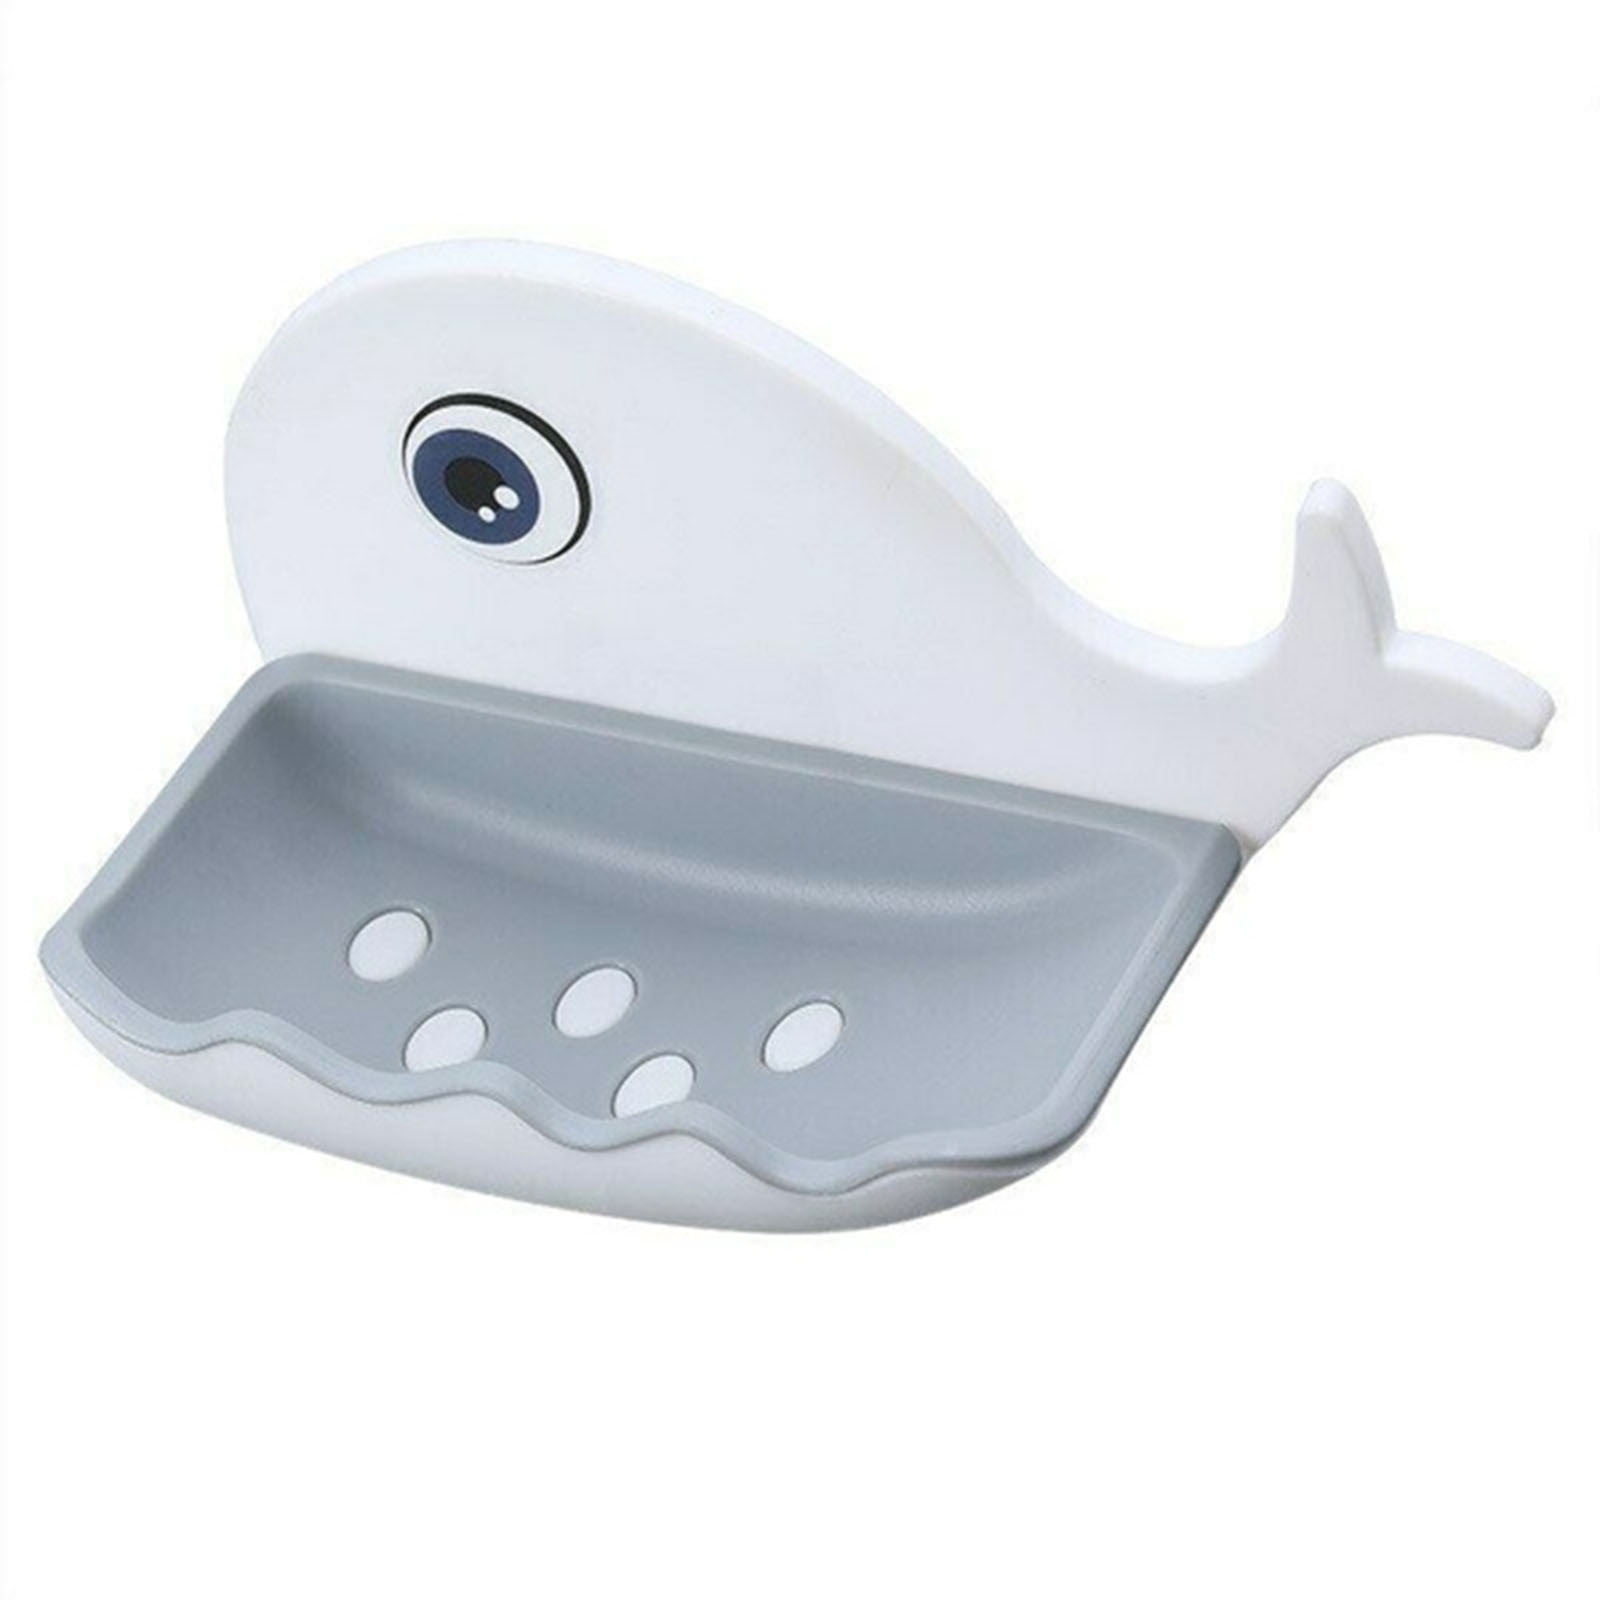 1PC Stylish Whale Soap Holder Creative Ceramic Whale Soap Tray for Home Toilet 